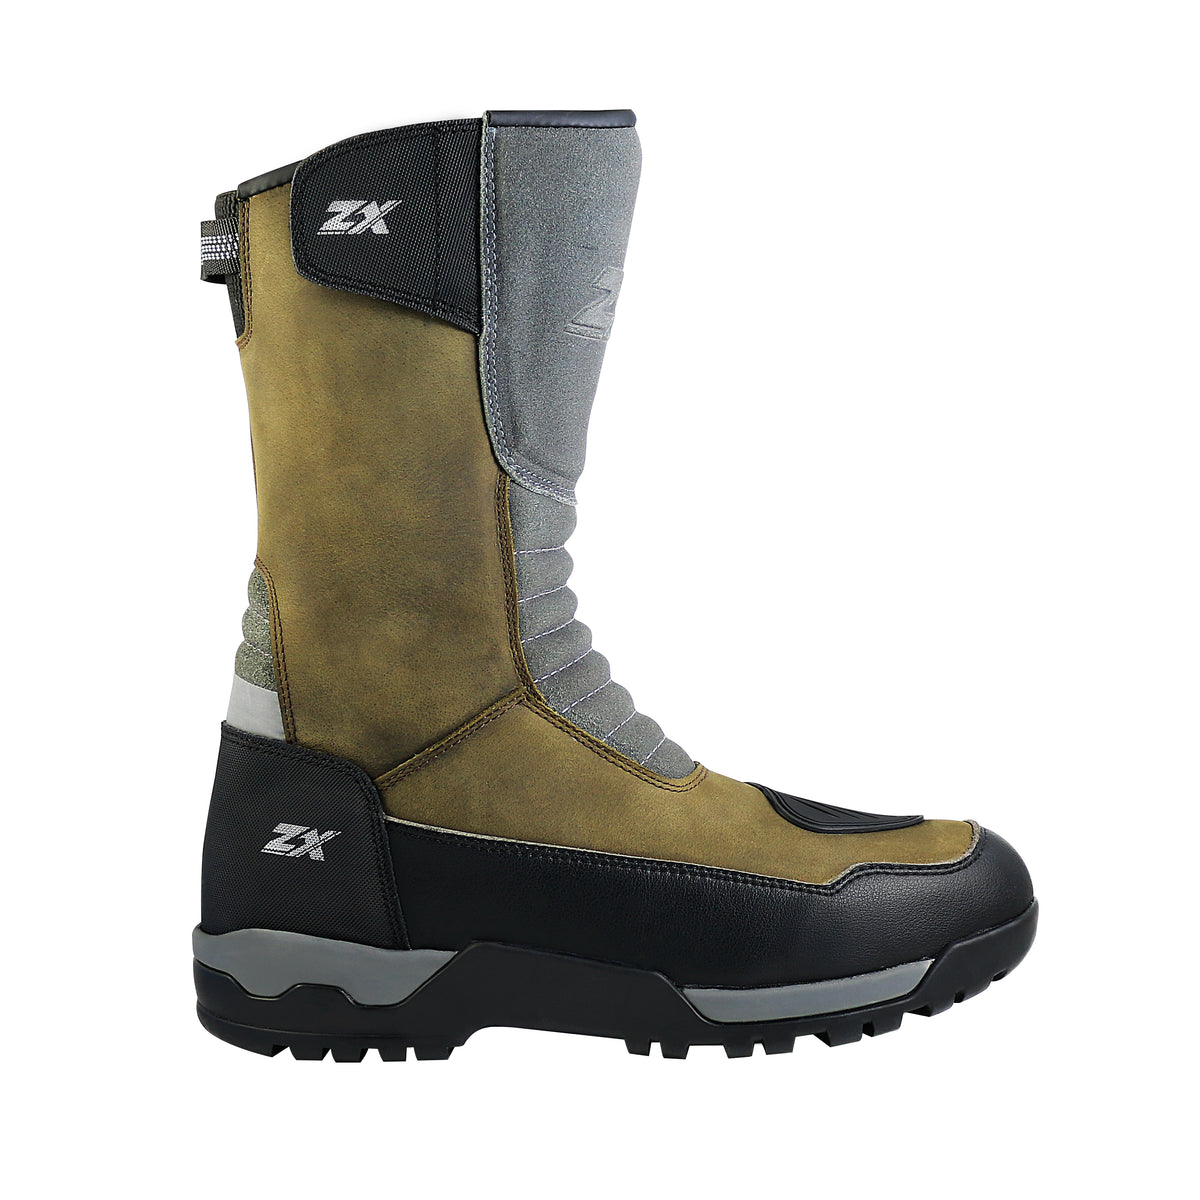 High Performance Adventure Style Boot Waterproof with Zip and 